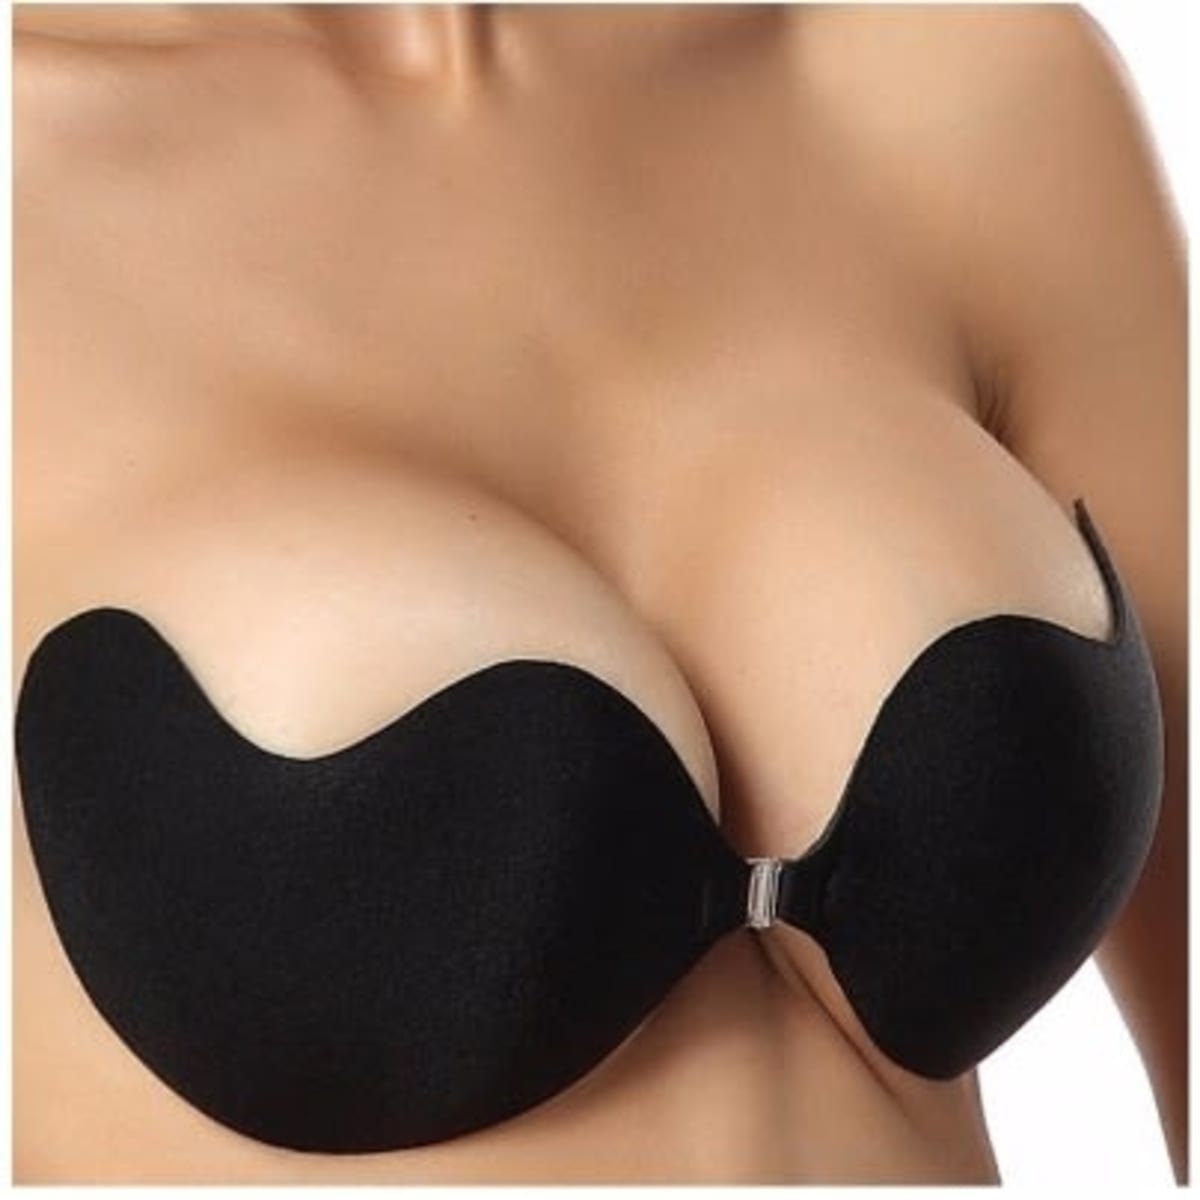 Pxcl Backless Push Up Bras Self Adhesive Strapless Bras, Women